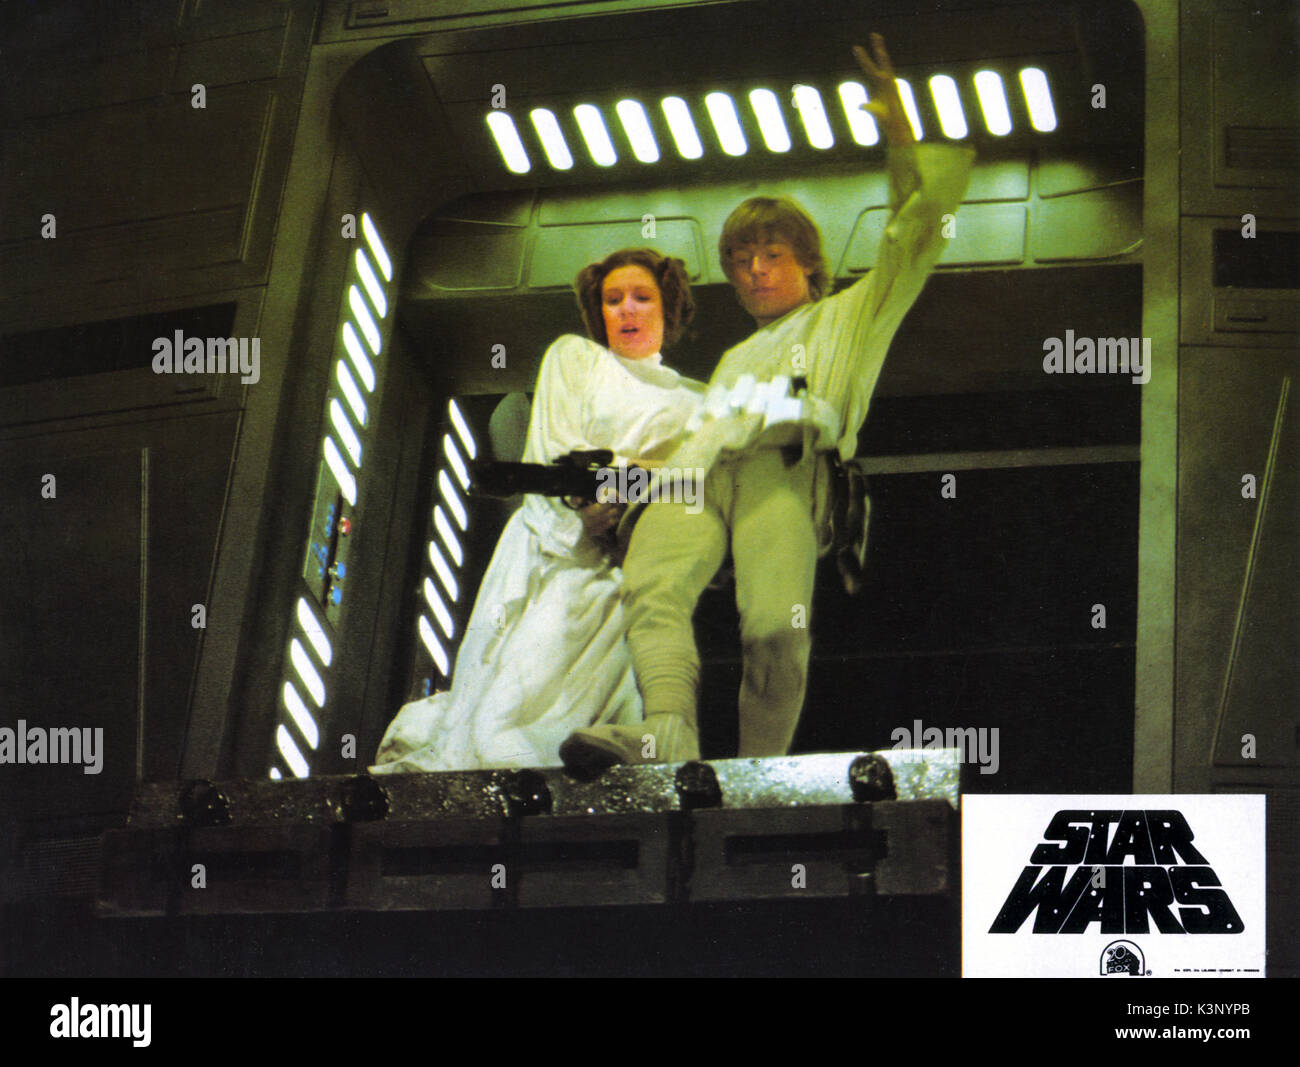 STAR WARS: EPISODE IV - A NEW HOPE [US 1977] CARRIE FISHER as Princess Leia, MARK HAMILL as Luke Skywalker     Date: 1977 Stock Photo